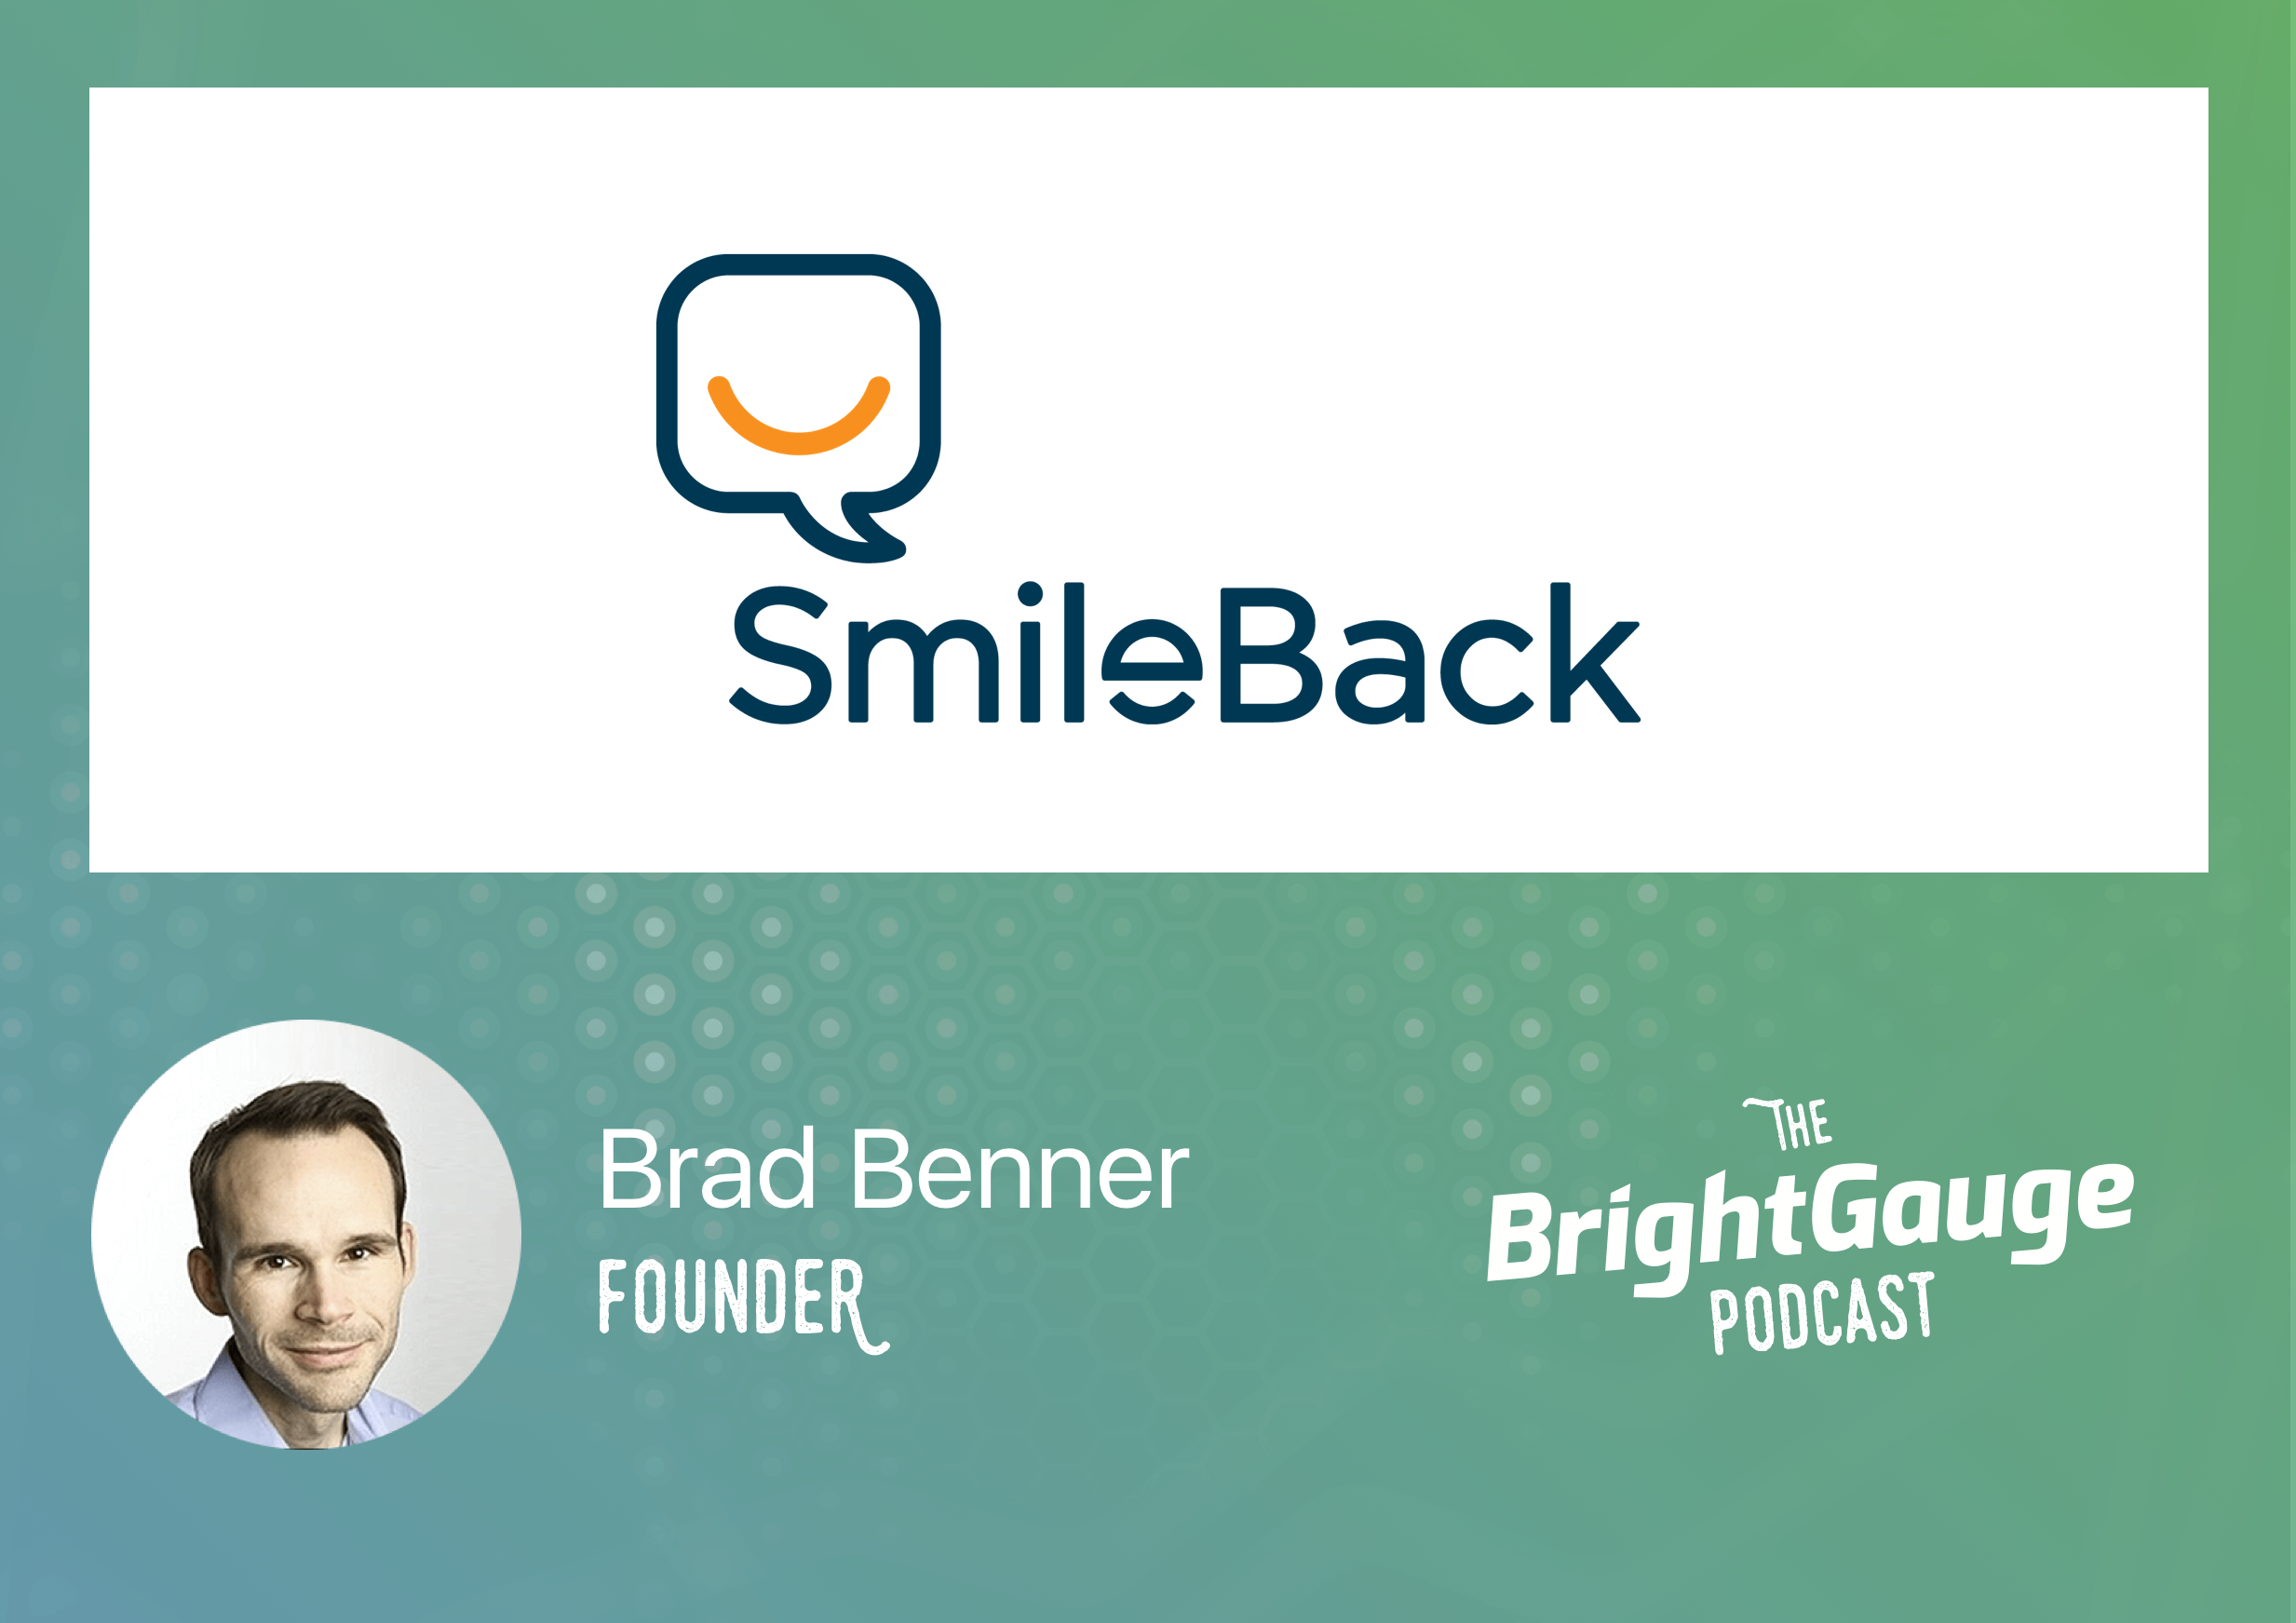 [Podcast] Episode 9 with Brad Benner of SmileBack